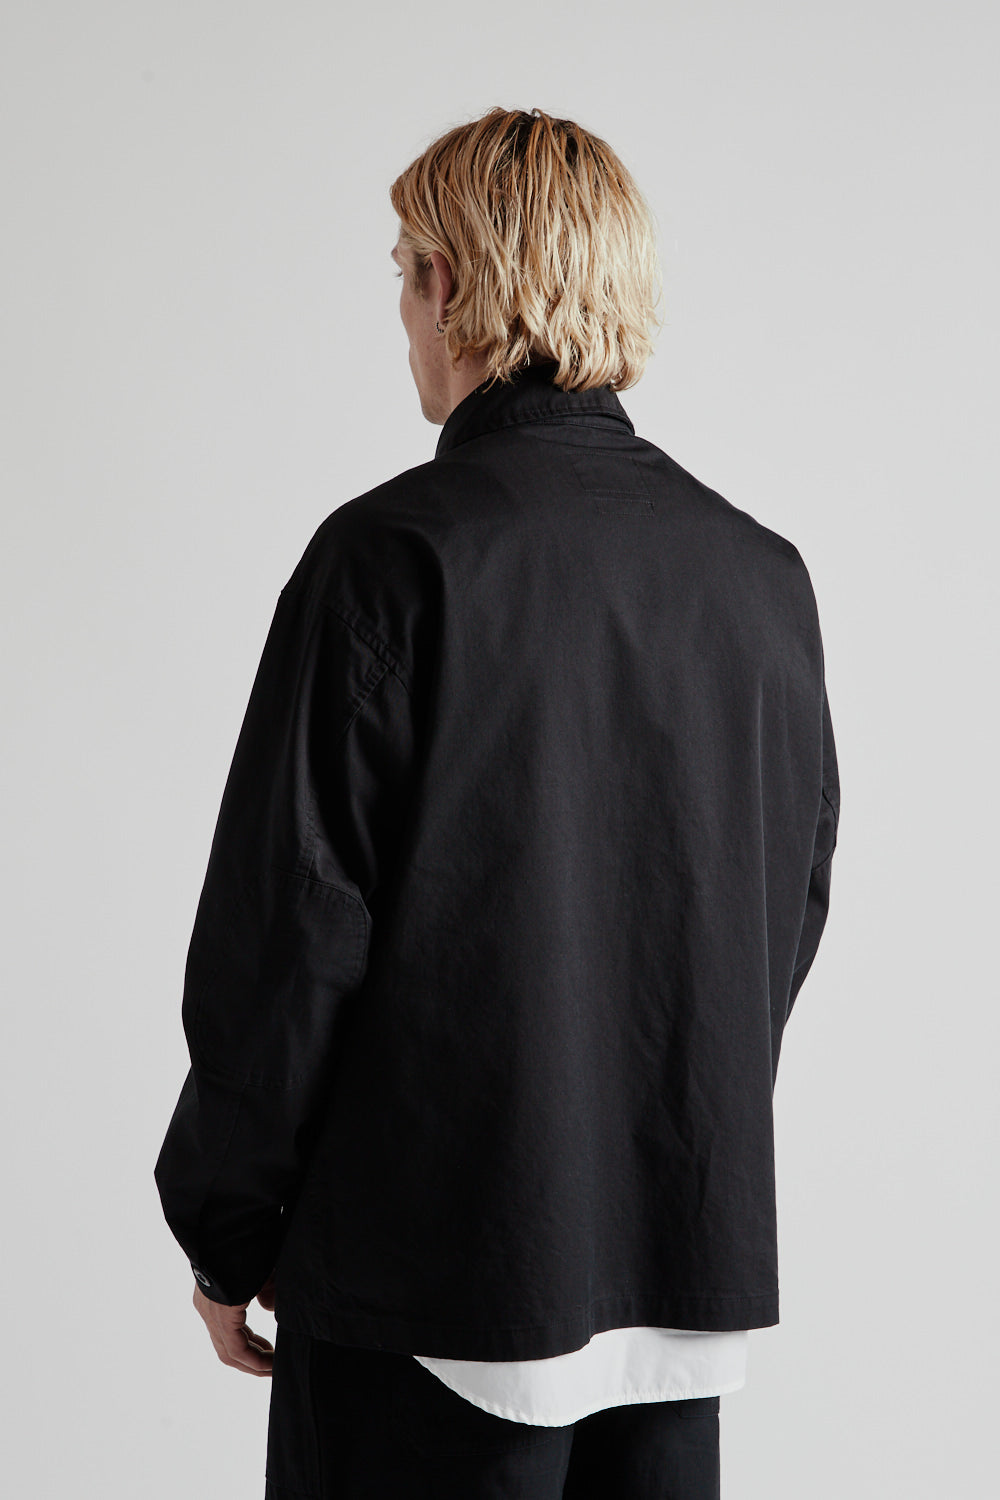 Frizmworks Round Patch Coverall Jacket in Black